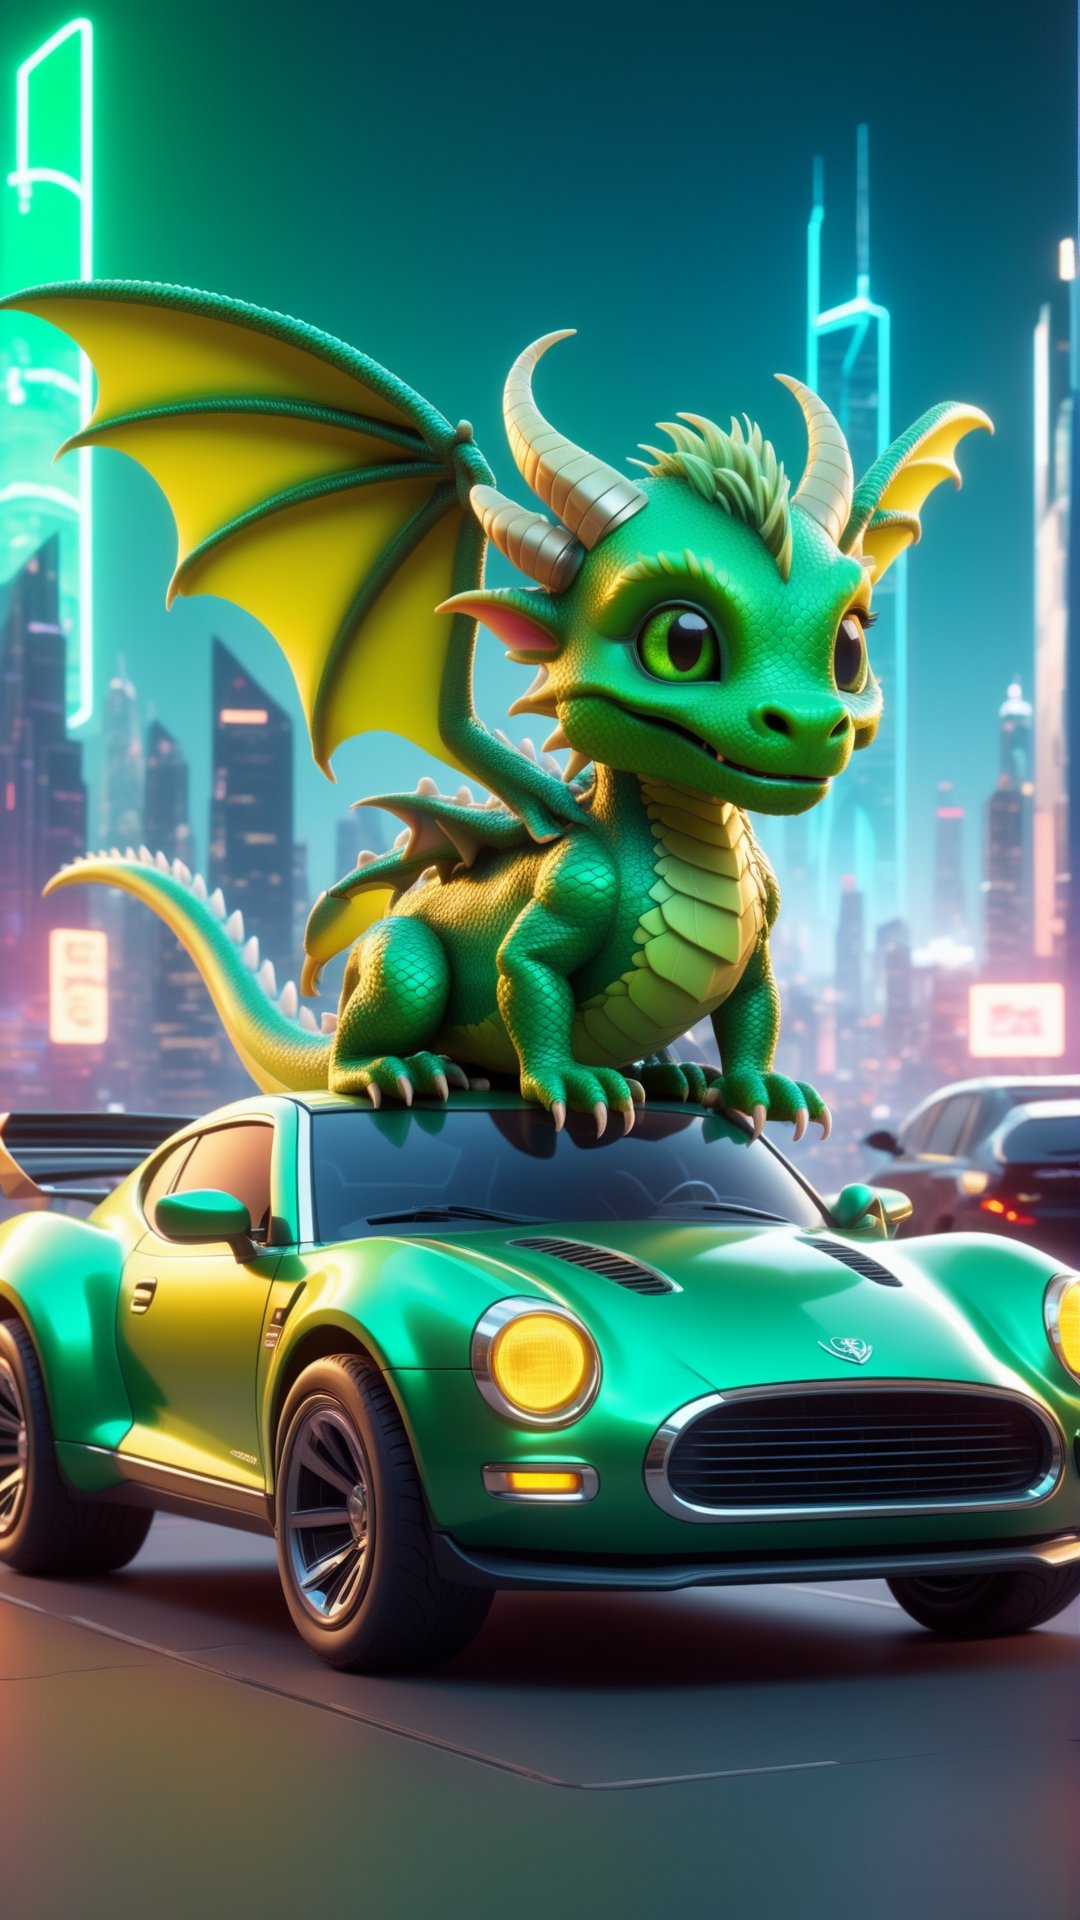 A charming 3d rendering of a cute green dragon in a chibi - style. the dragon perches on top of a car, with a backdrop of a futuristic cyberpunk city street. neon lights, towering skyscrapers, and a bustling atmosphere add vibrancy to the scene. aspect ratio